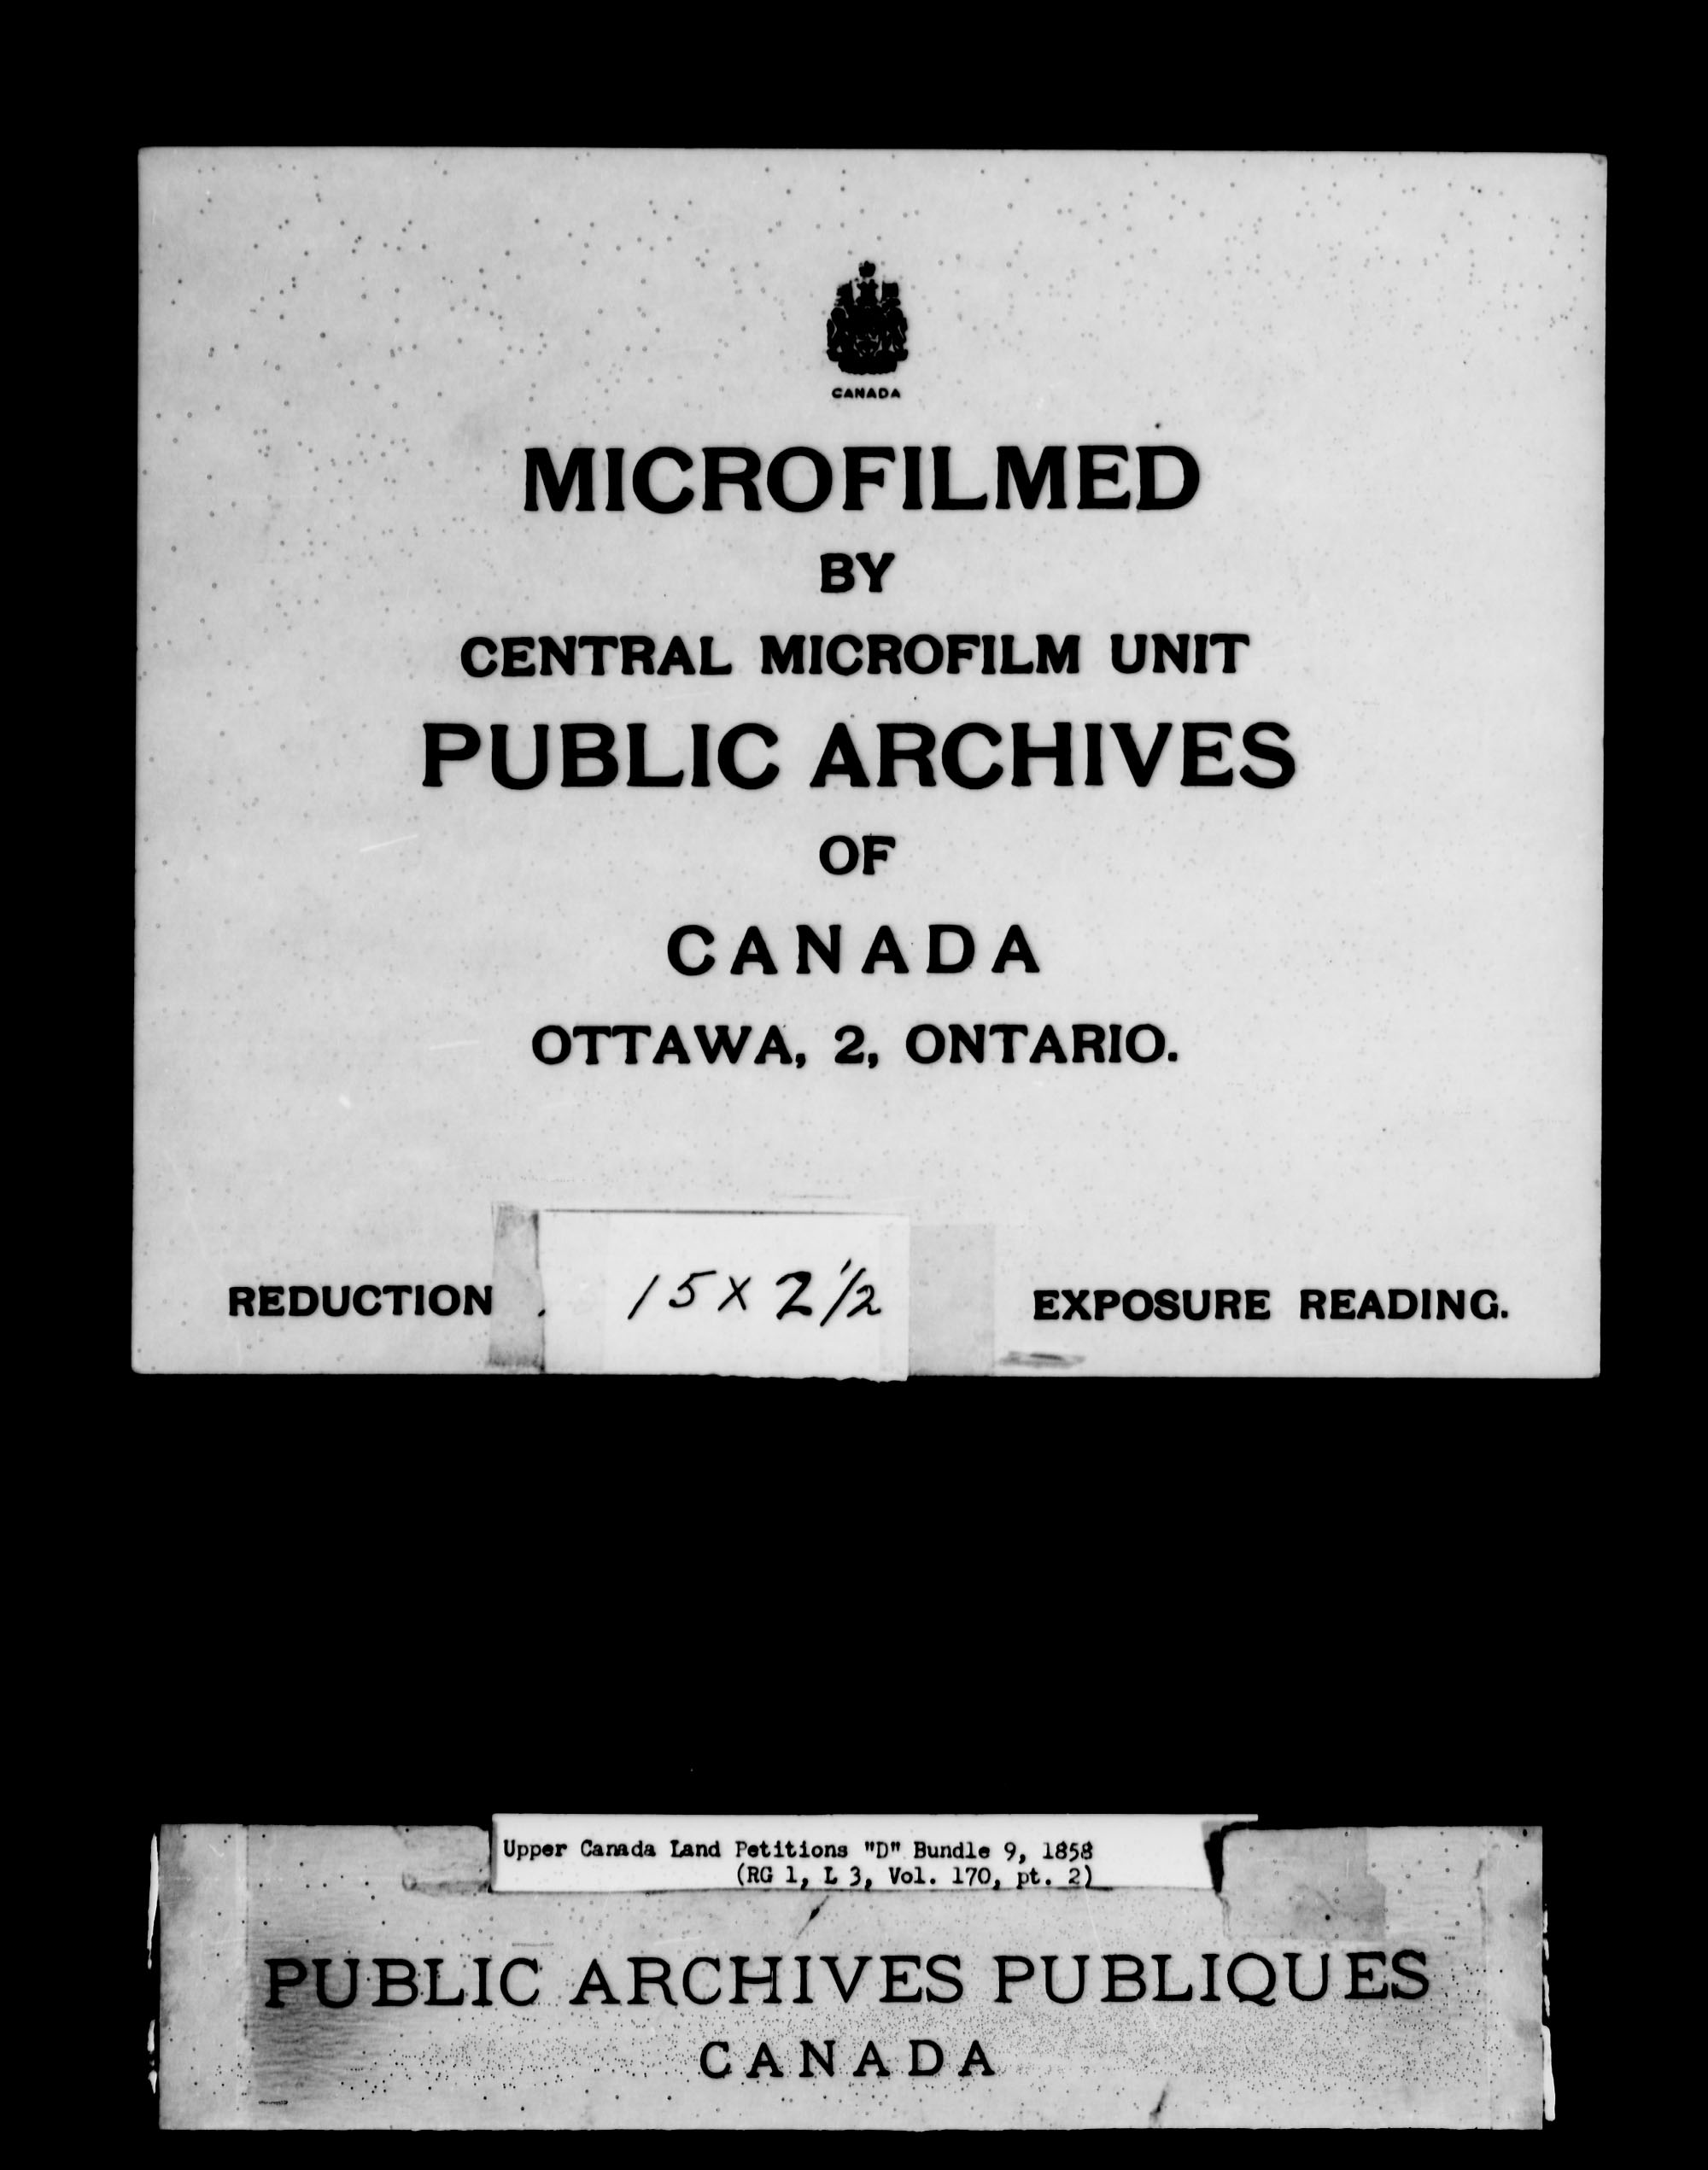 Title: Upper Canada Land Petitions (1763-1865) - Mikan Number: 205131 - Microform: c-1885